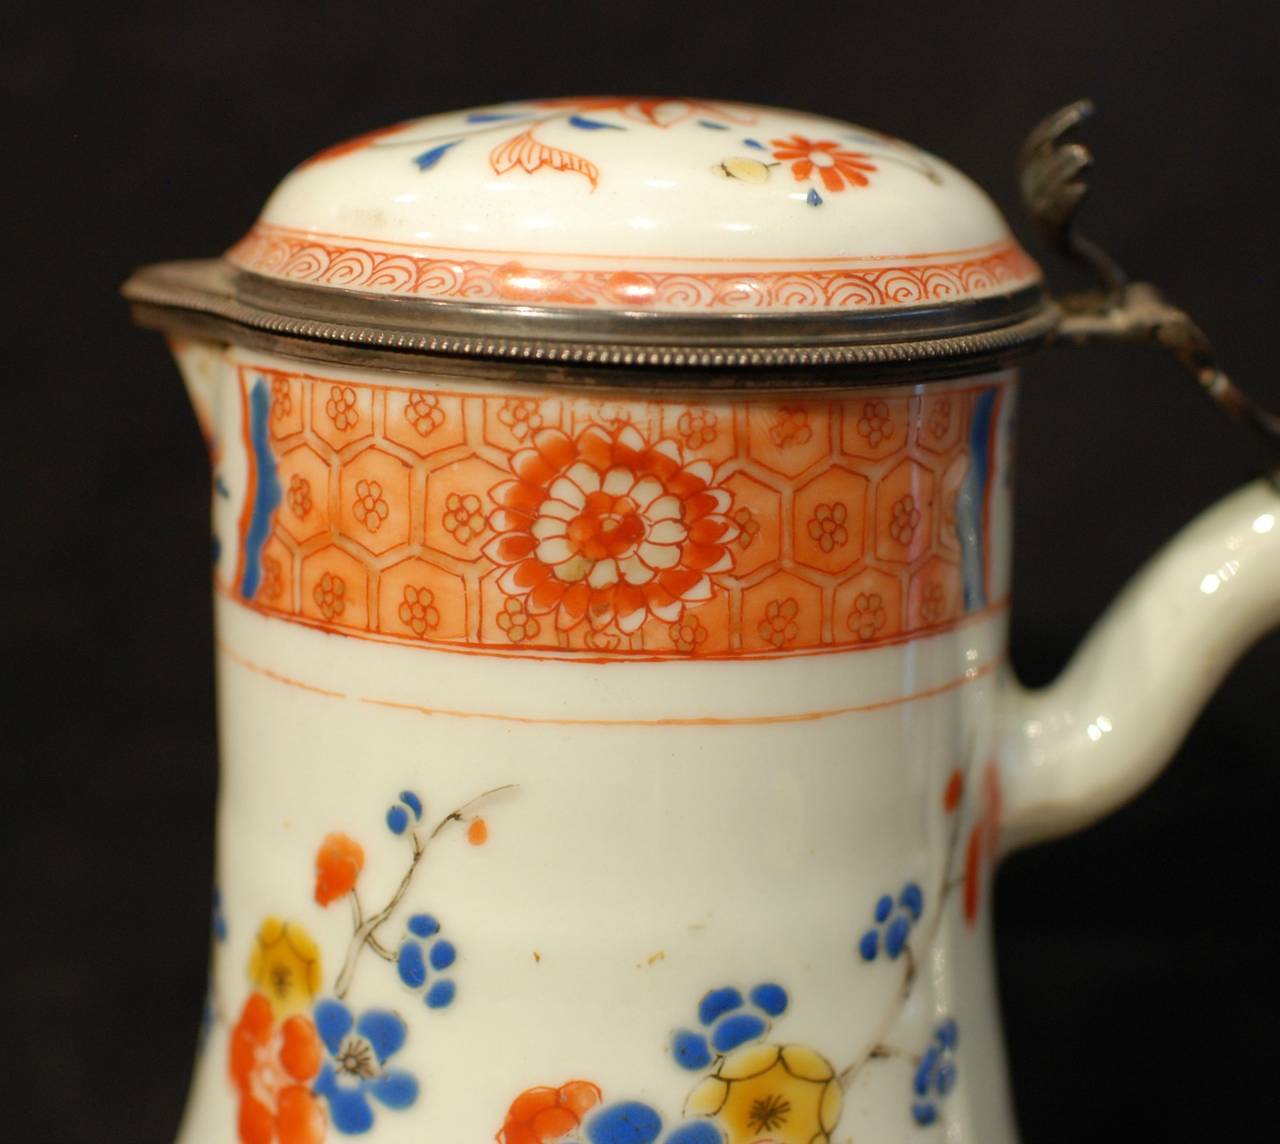 Chinese Porcelain Coffee Pot from the 18th Century East India Company